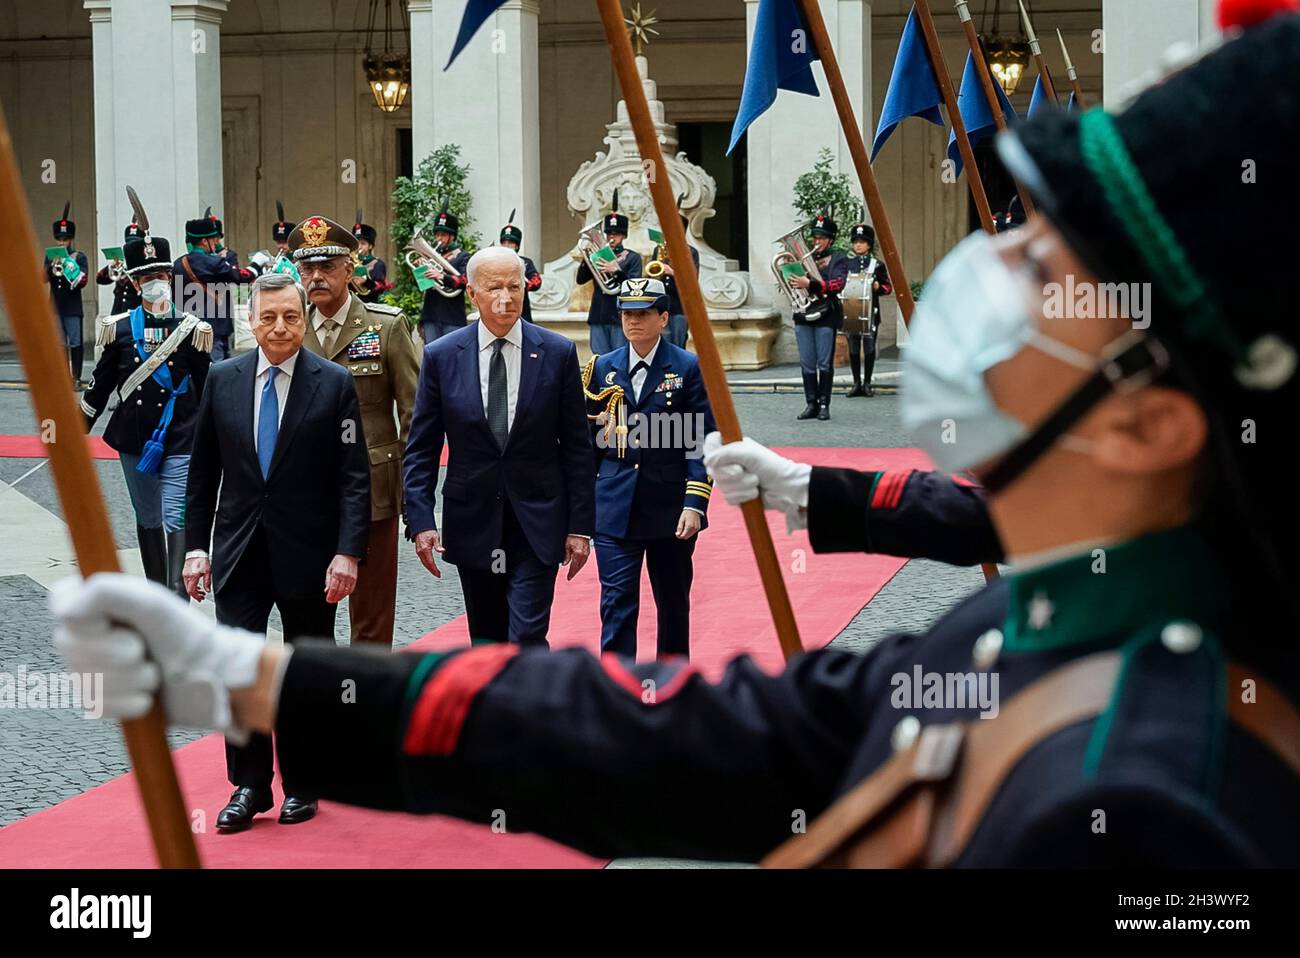 Rome, Italy. 29th Oct, 2021. U.S President Joe Biden reviews the honor guard escorted by Italian Prime Minister Mario Draghi, left, prior to a bilateral meeting at the Palazzo Chigi October 29, 2021 in Vatican City, Vatican. Credit: Adam Schultz/White House Photo/Alamy Live News Stock Photo